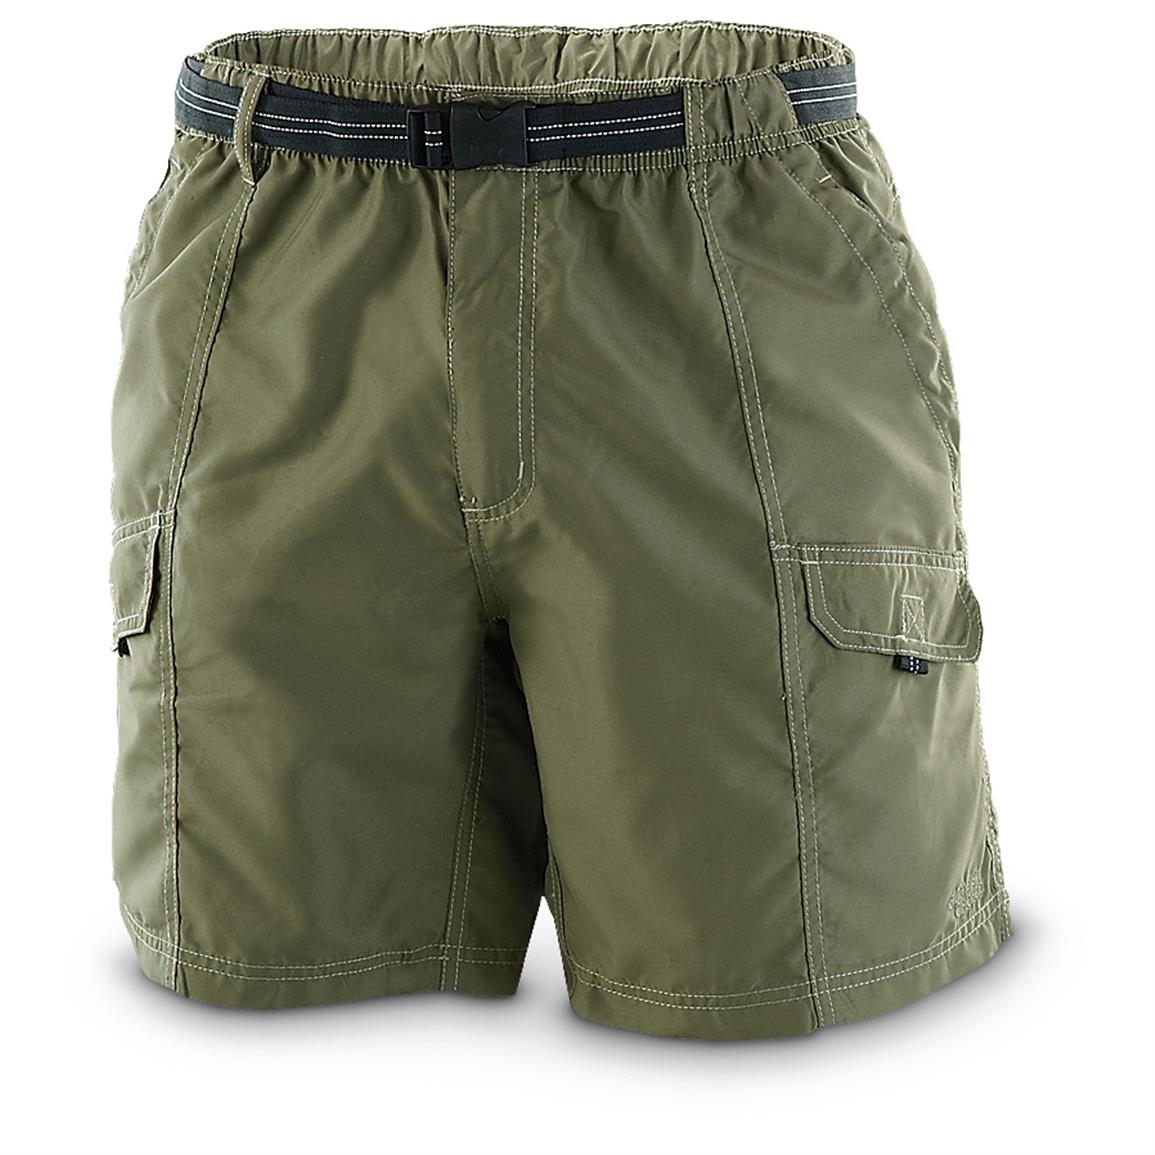 Guide's Choice Men's River Shorts - 621023, Shorts at Sportsman's Guide